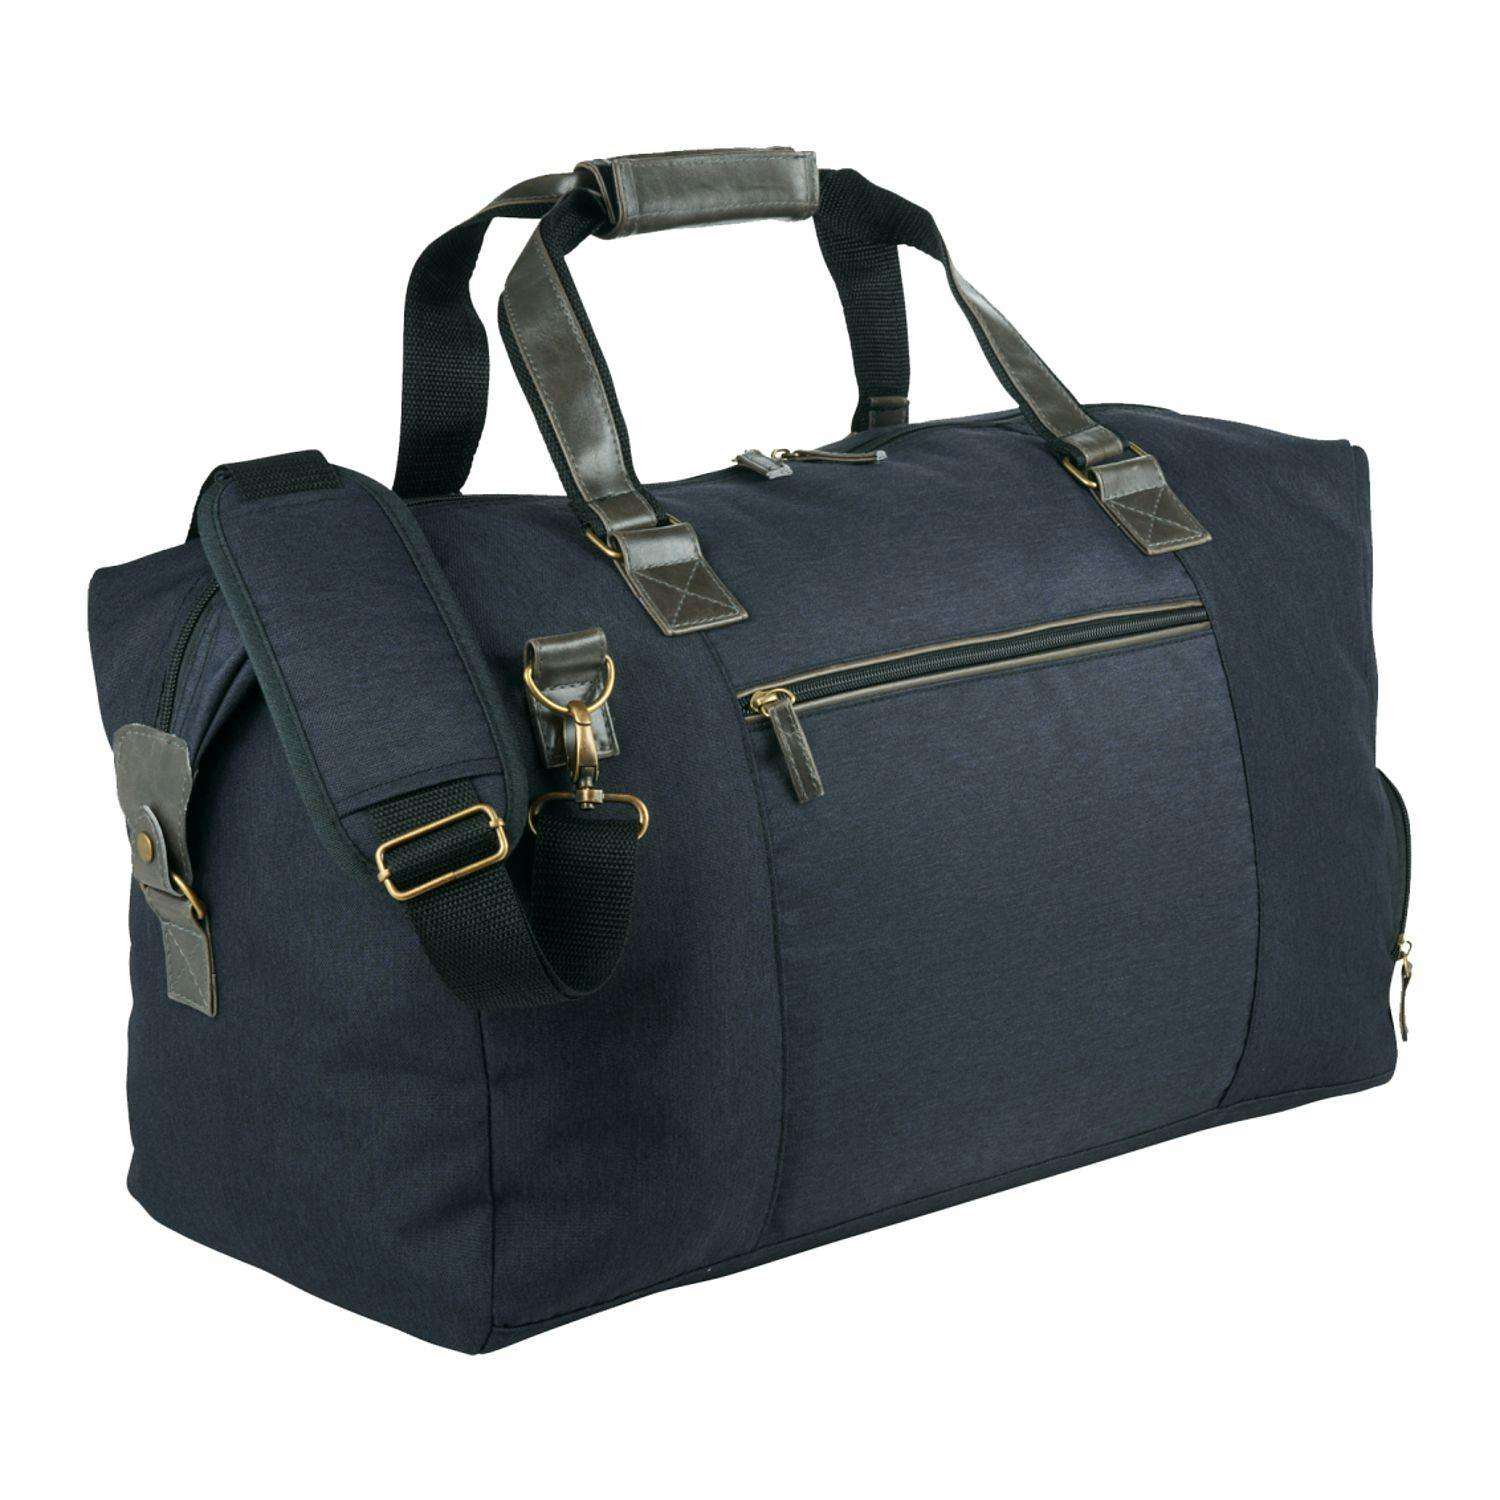 The Capitol 20" Duffel Bag - additional Image 2